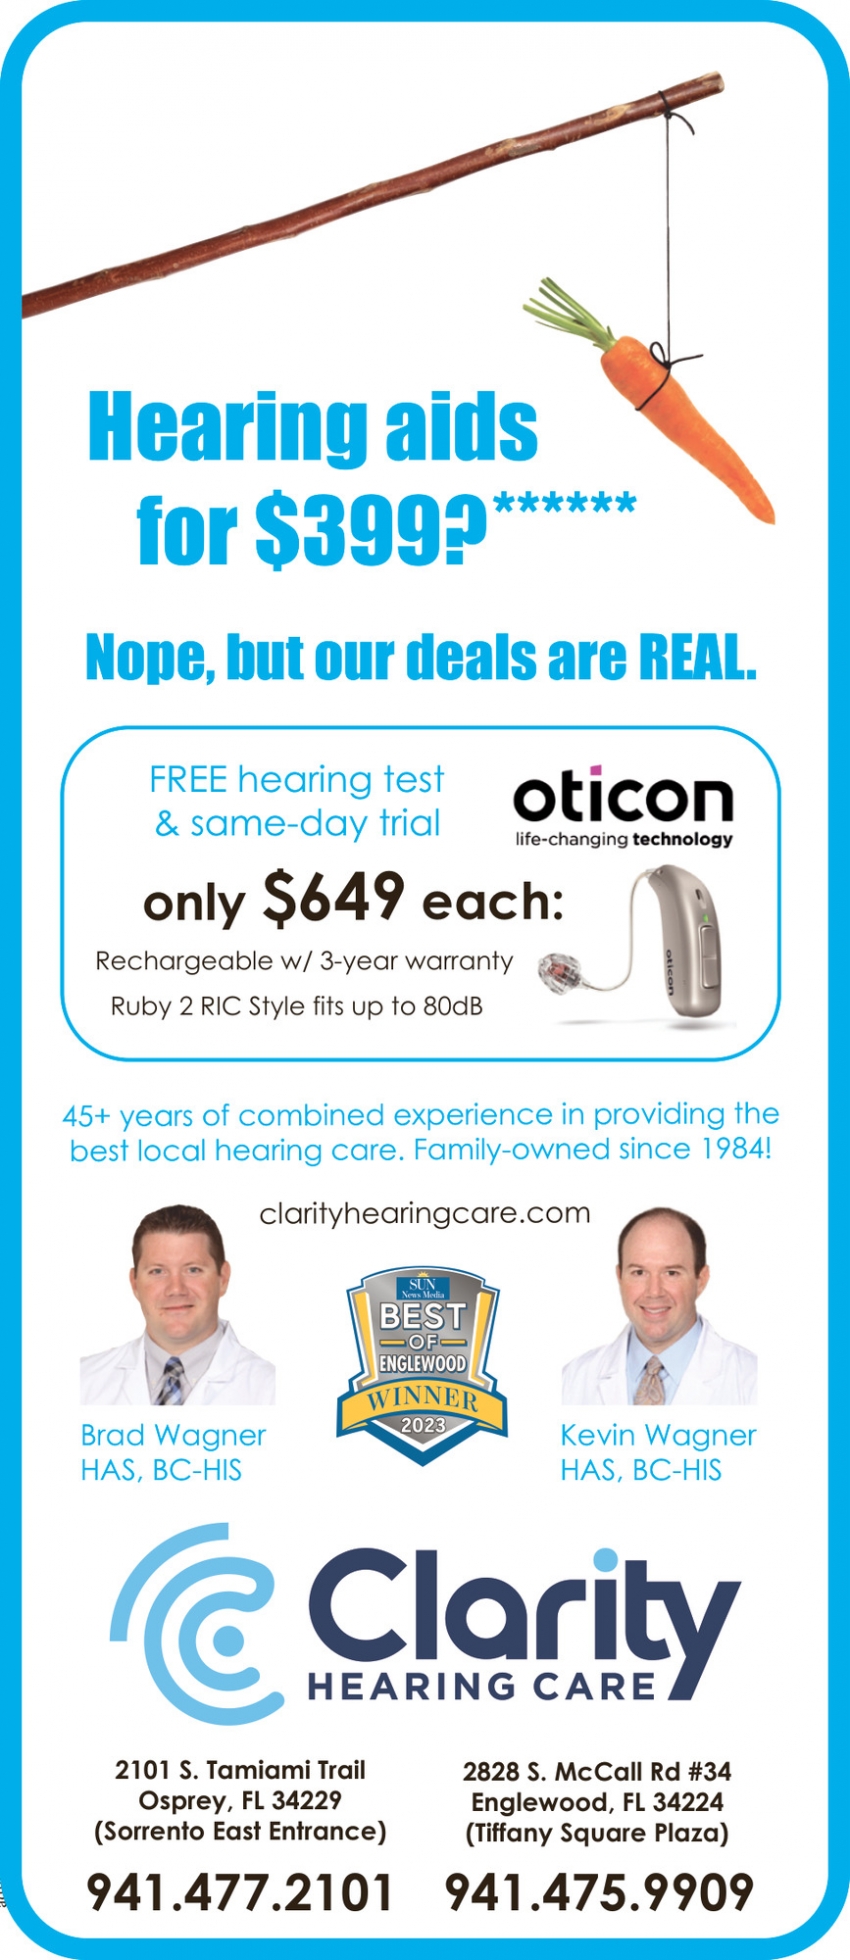 Hearing Aids for $399?